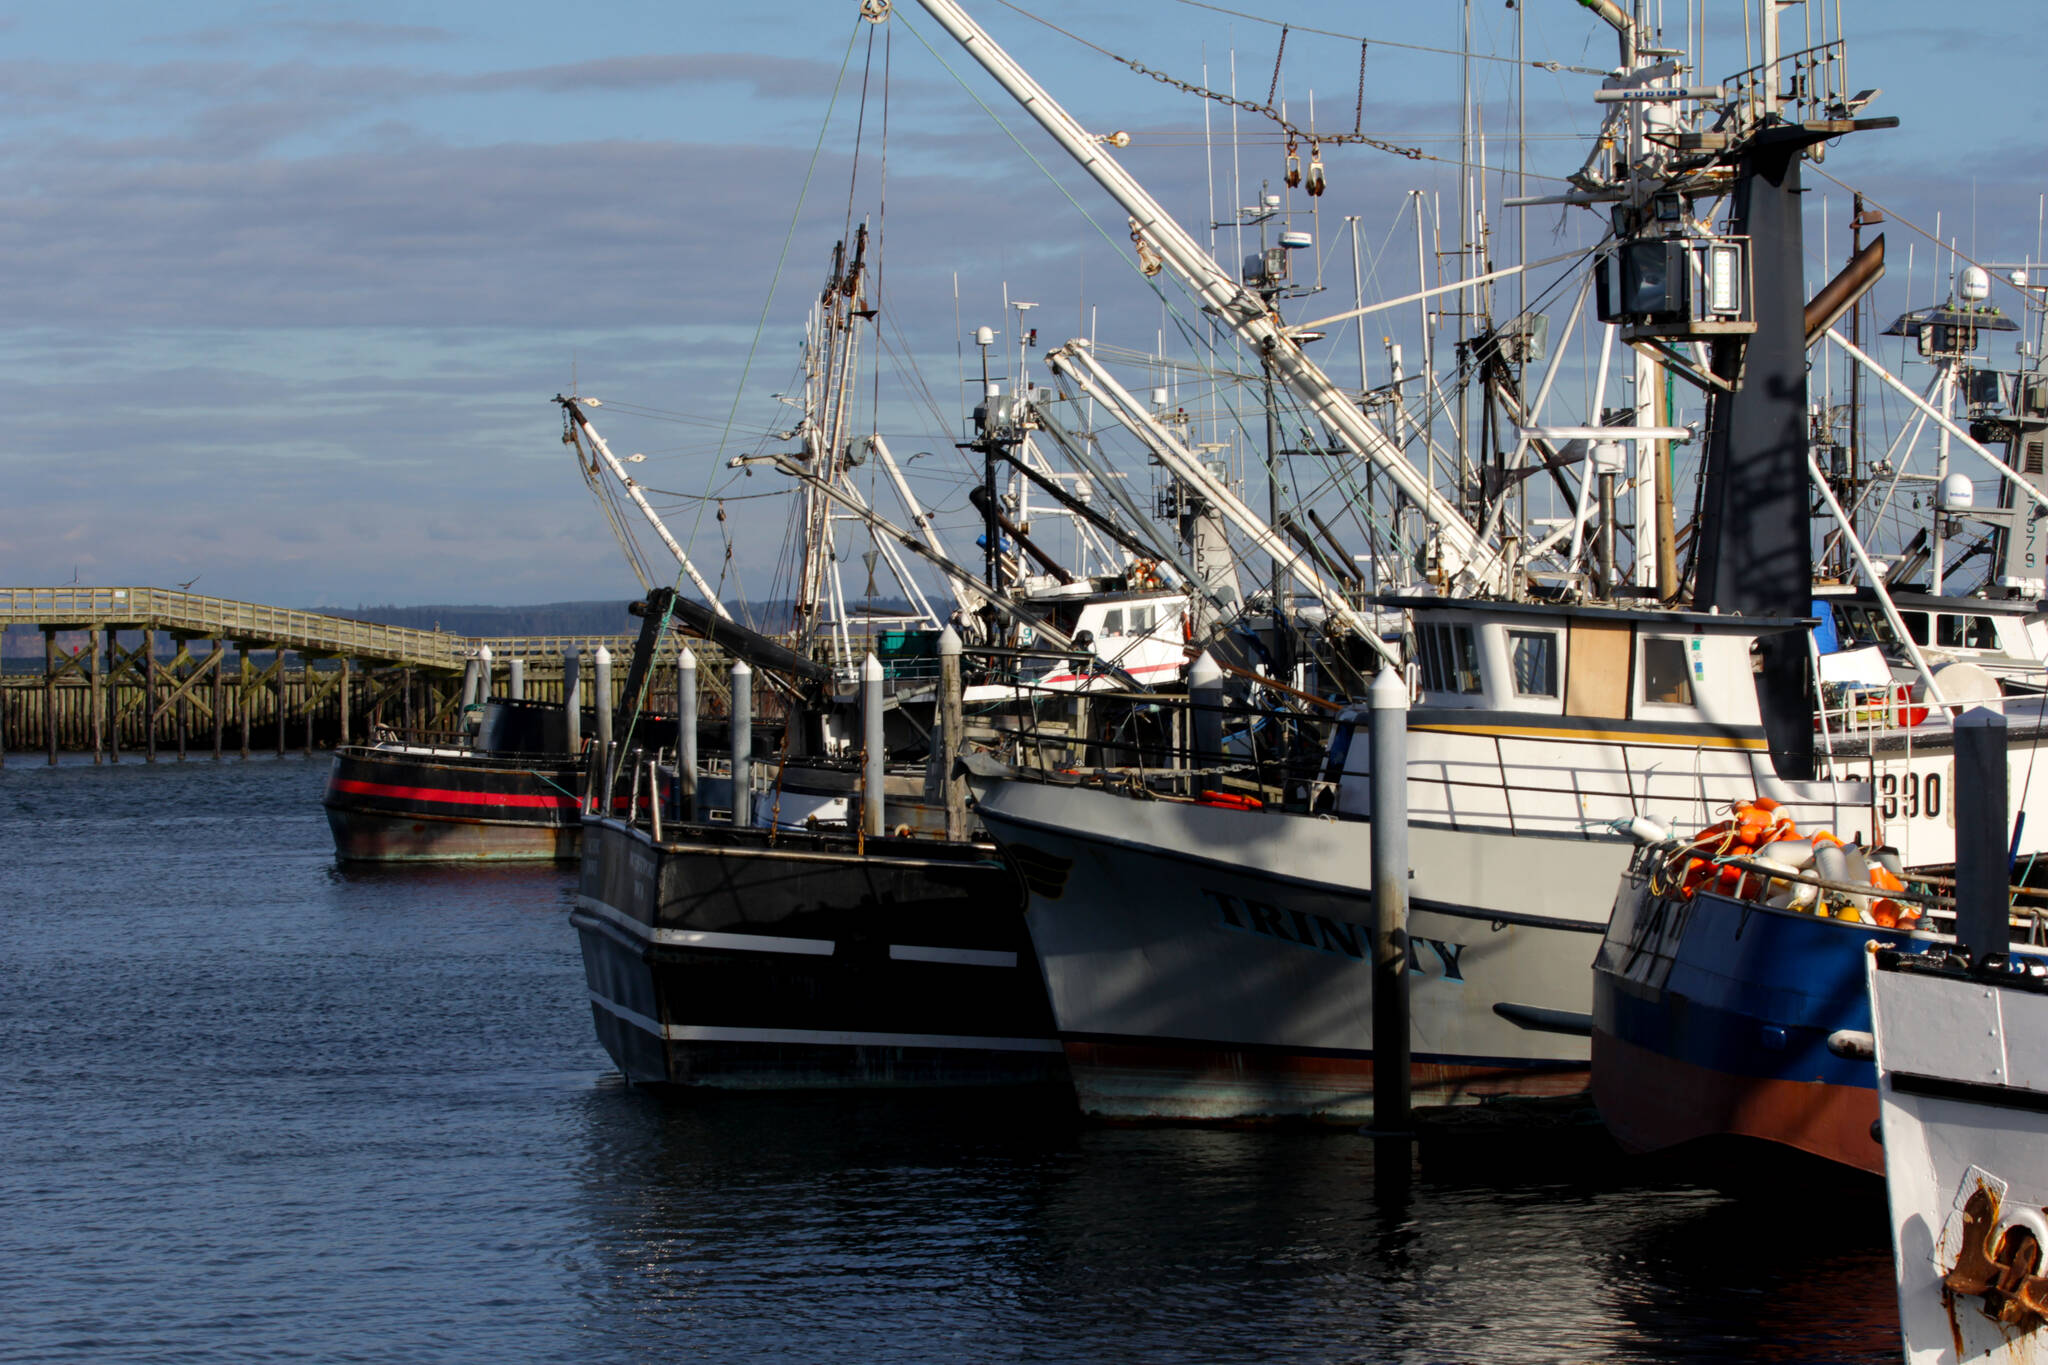 Boats line the harbors of Western Washington, many of their crews preparing for the upcoming Dungeness crab season. (Michael S. Lockett / The Daily World)